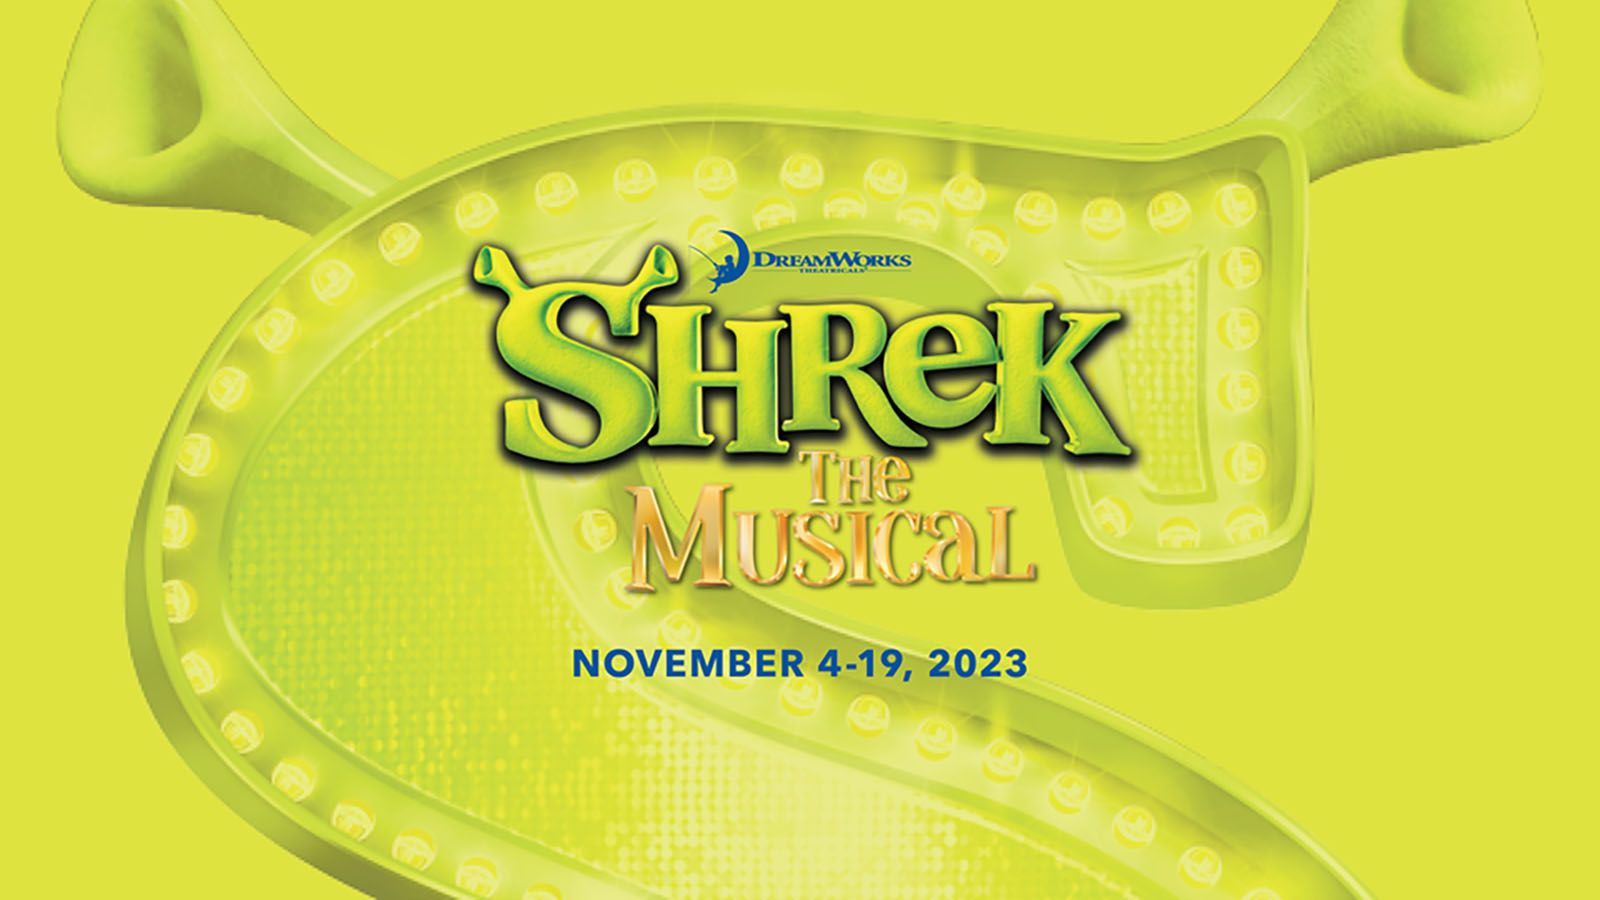 Fort Wayne Civic Theatre is putting on Shrek the Musical from Nov. 4-19 at Arts United Center.